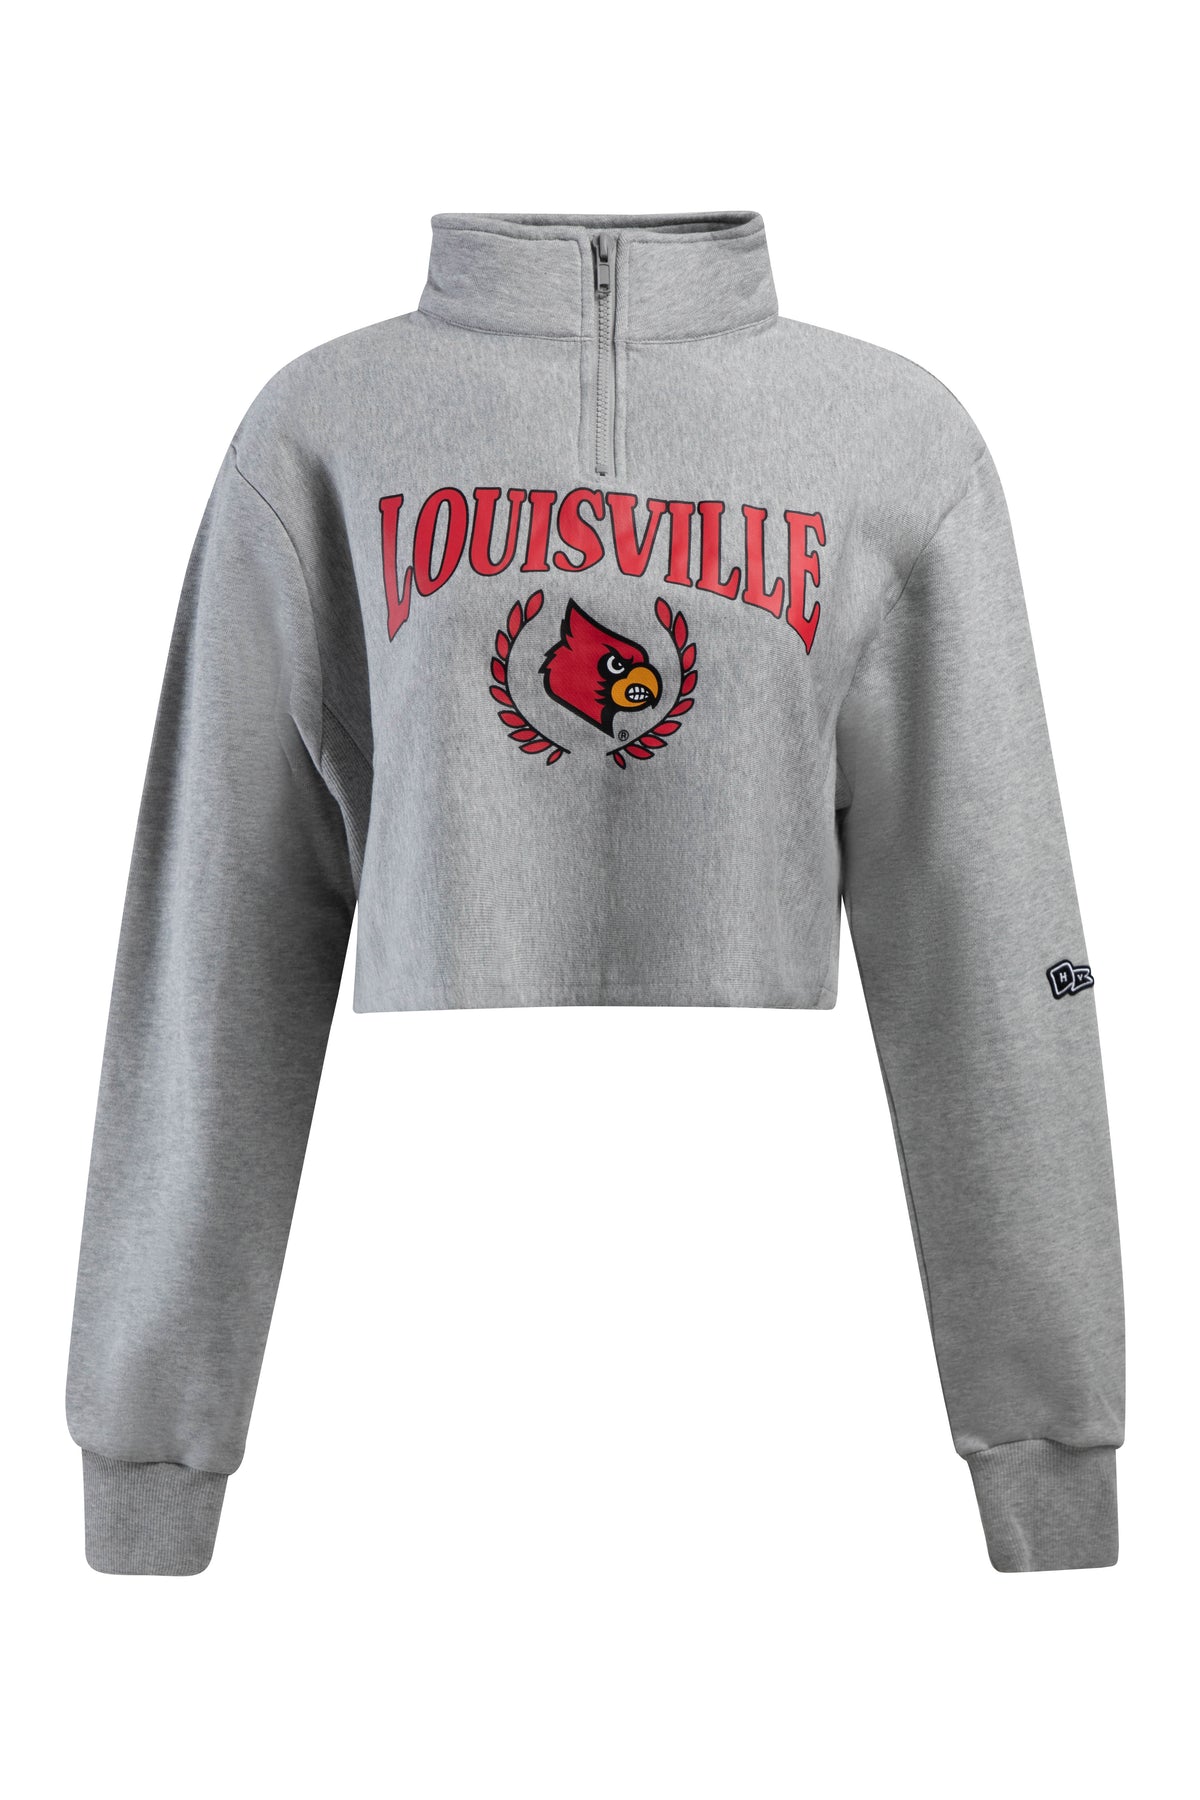 University of Louisville Apparel: Shop the Coolest UofL Gear Here!